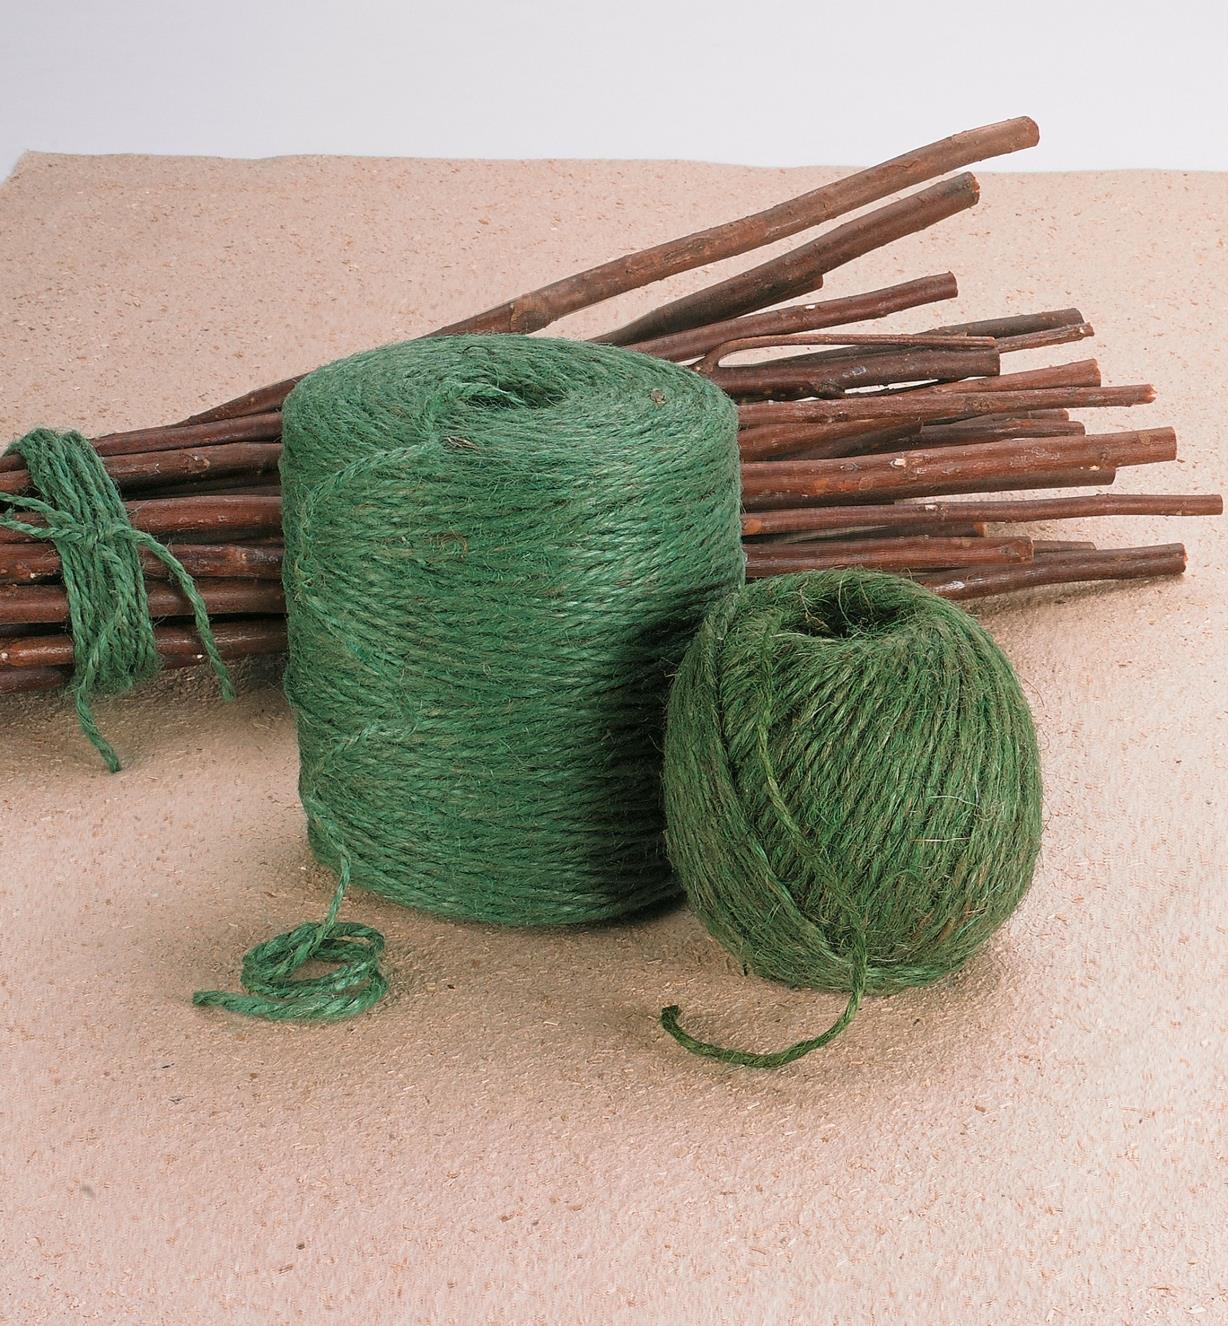 Two balls of Garden Twine beside a bundle of stick tied with twine